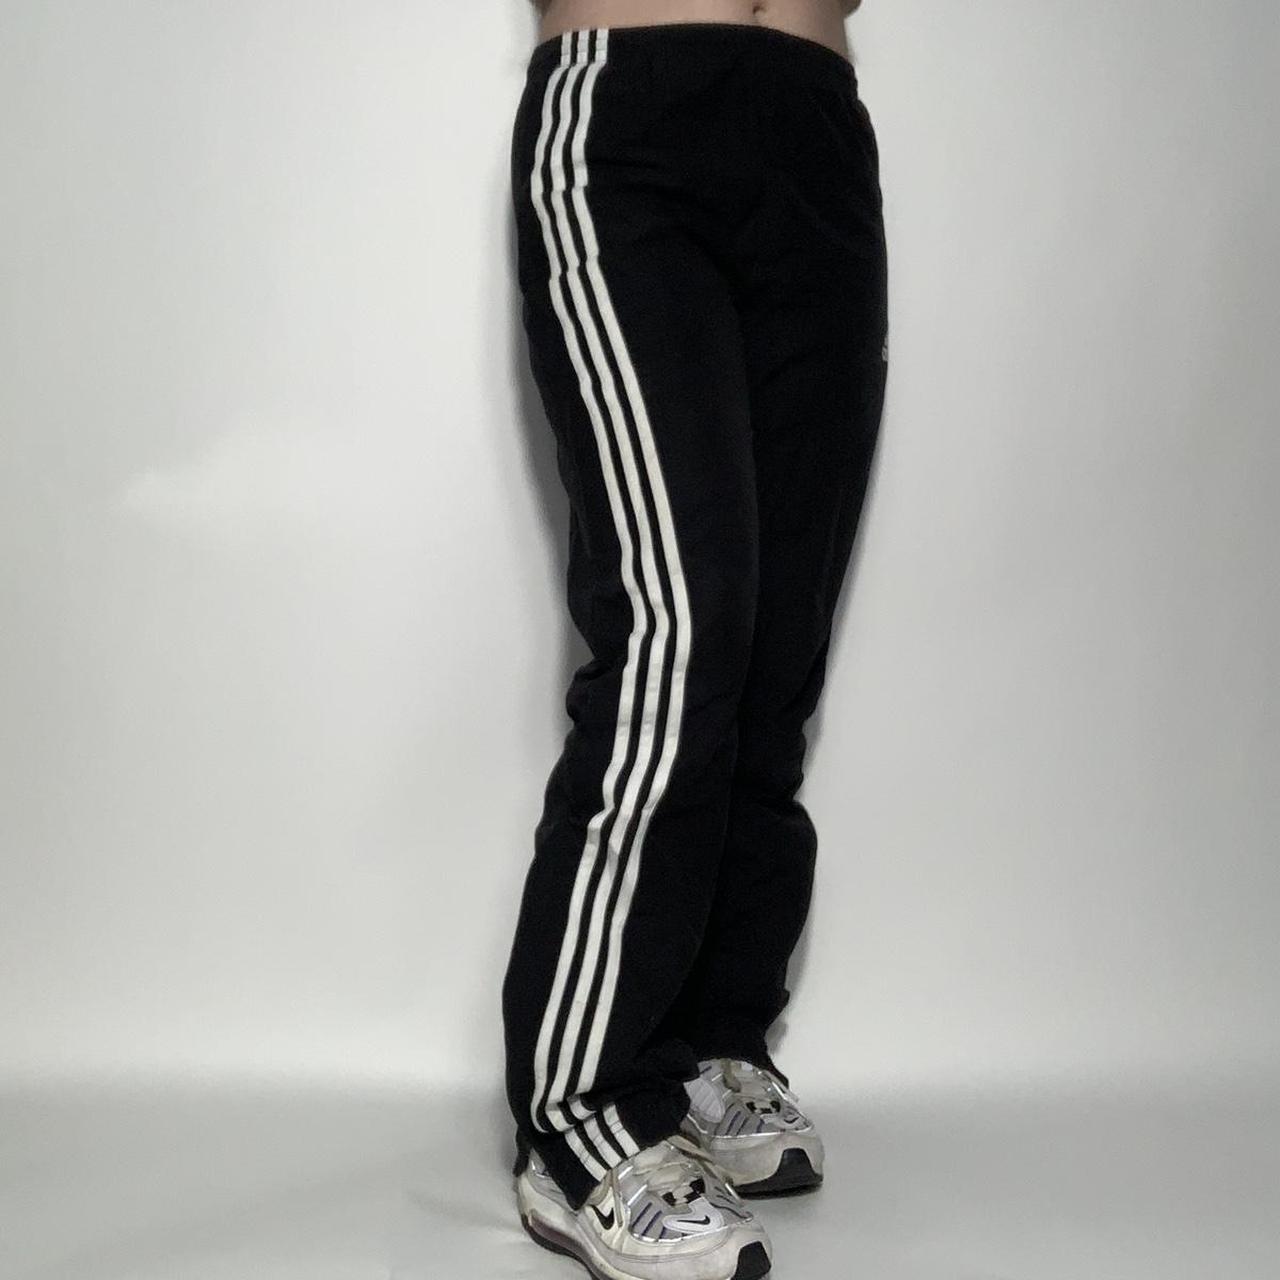 Vintage 90s Adidas unisex black and white baggy track pants